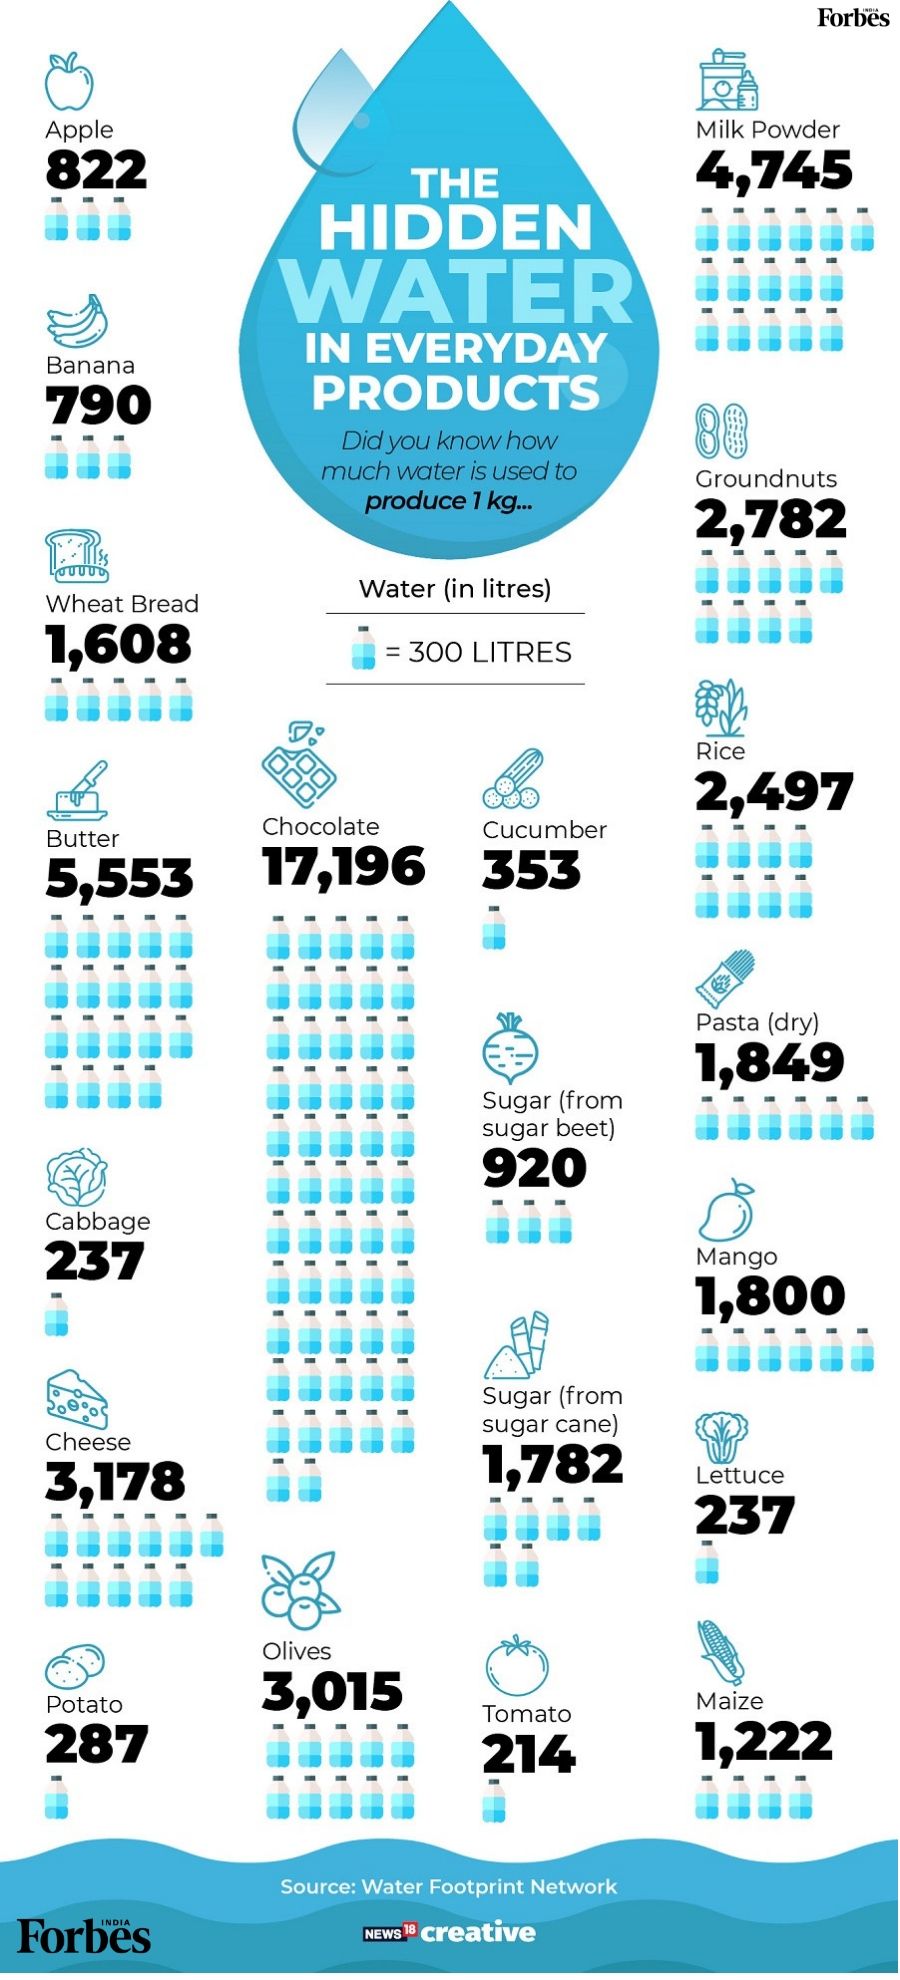 Understanding India's water crisis, by the numbers